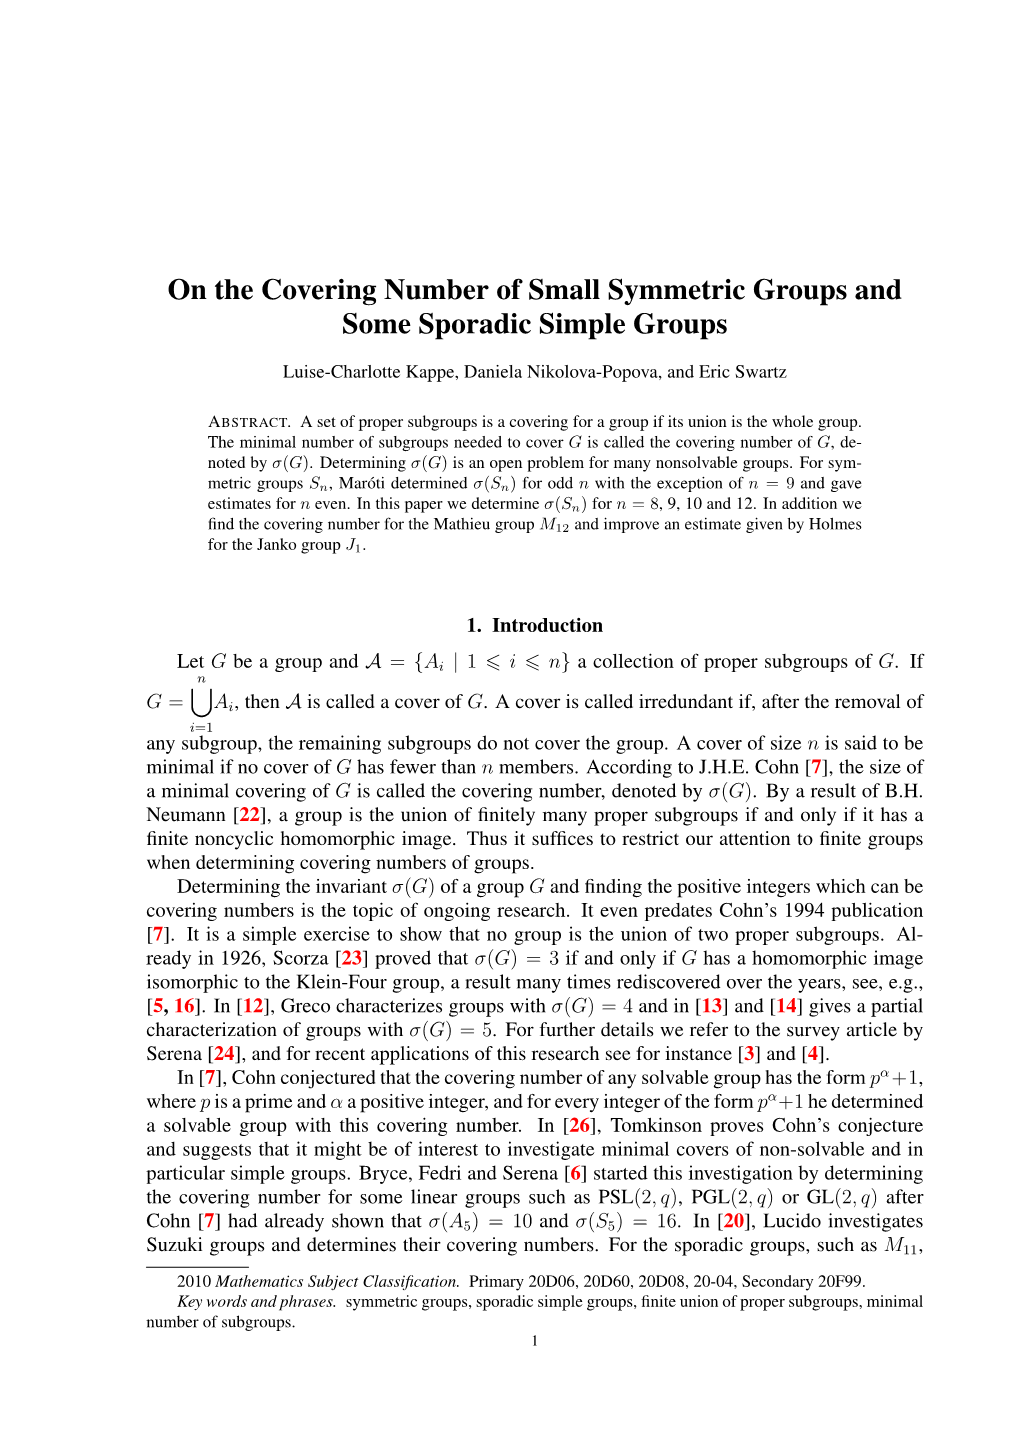 On the Covering Number of Small Symmetric Groups and Some Sporadic Simple Groups